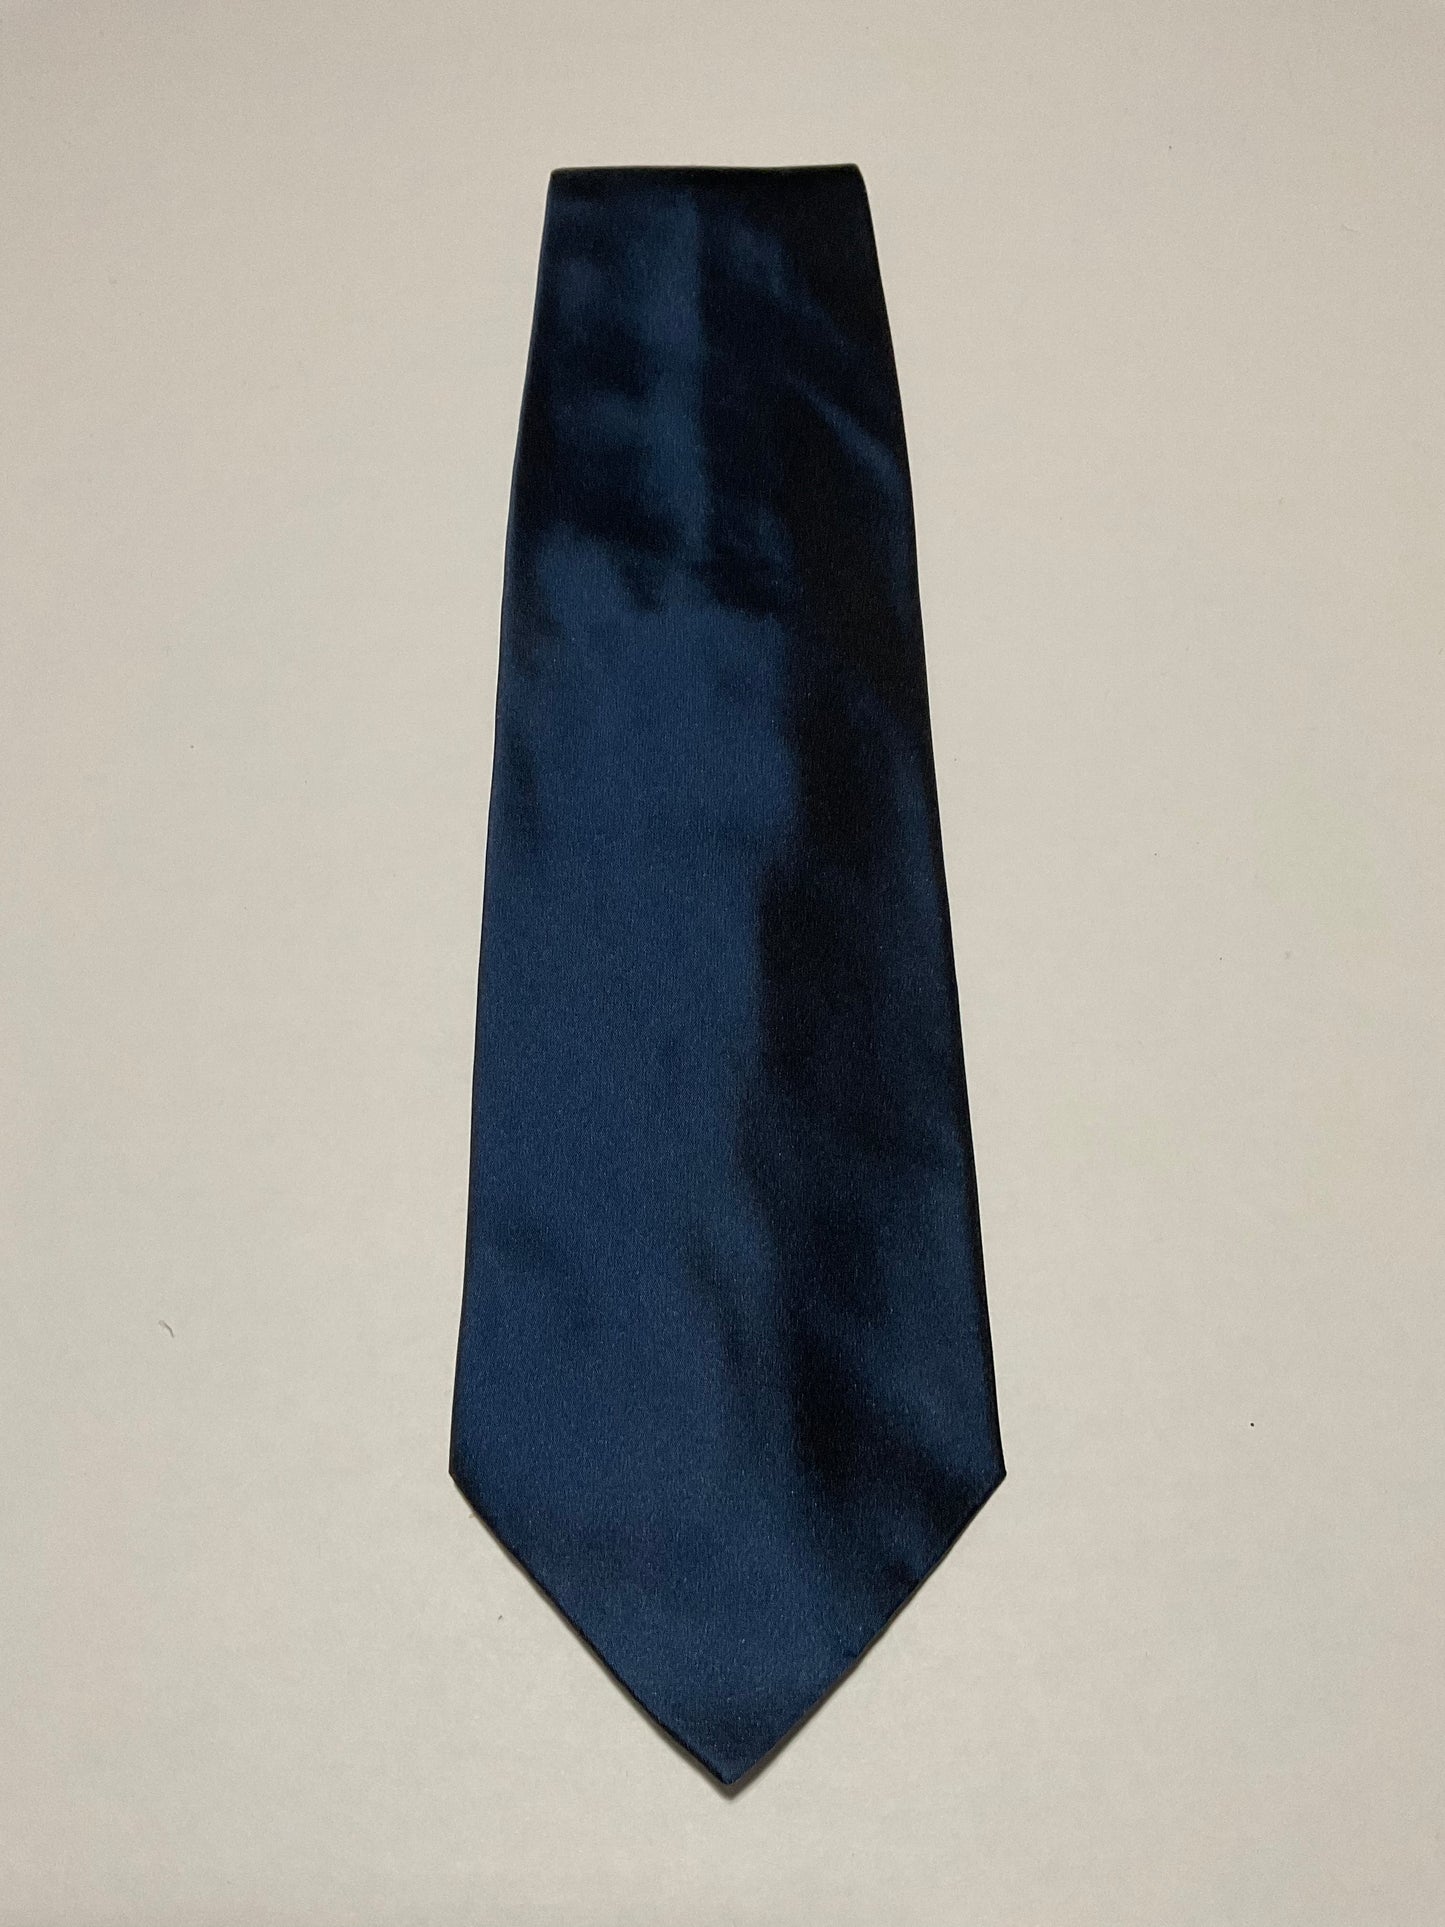 R P TIE / PURE SILK / NEW / APPX. 3 3/4” WIDE / HAND MADE IN ITALY